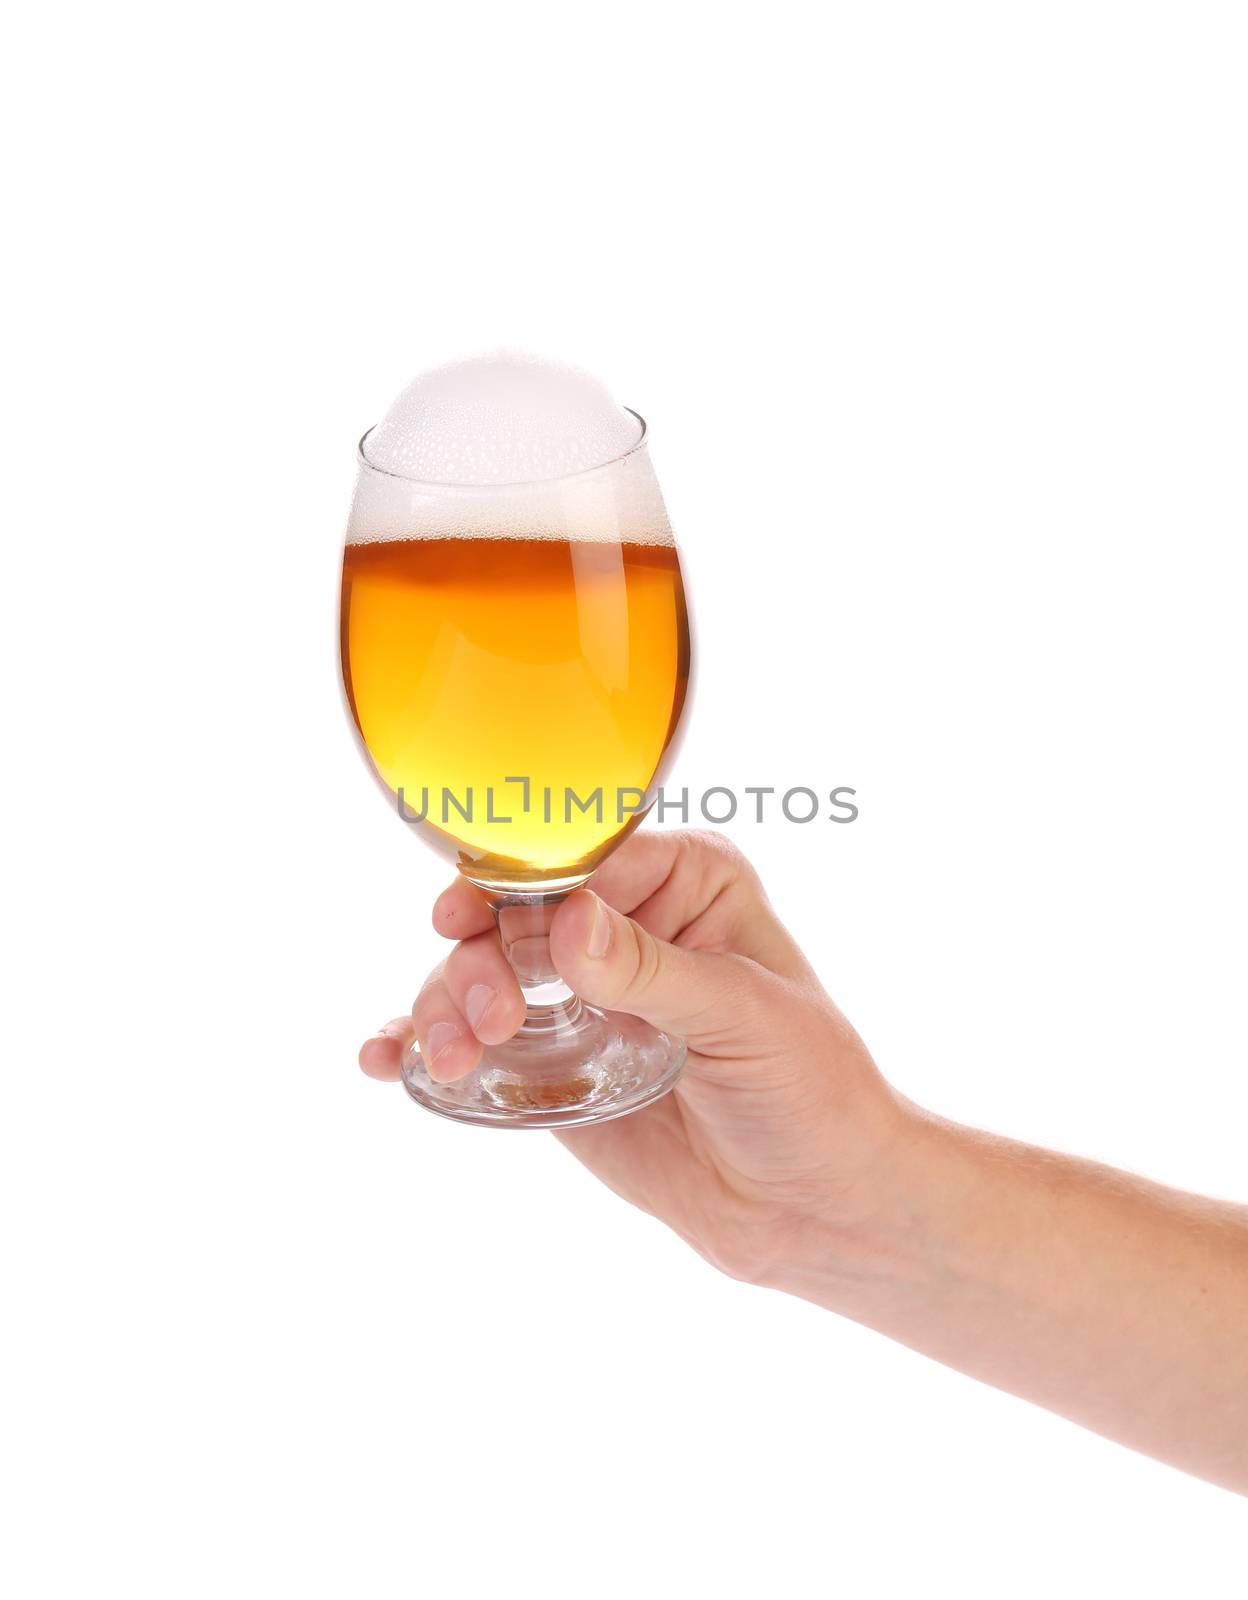 Hand with glass of beer. by indigolotos